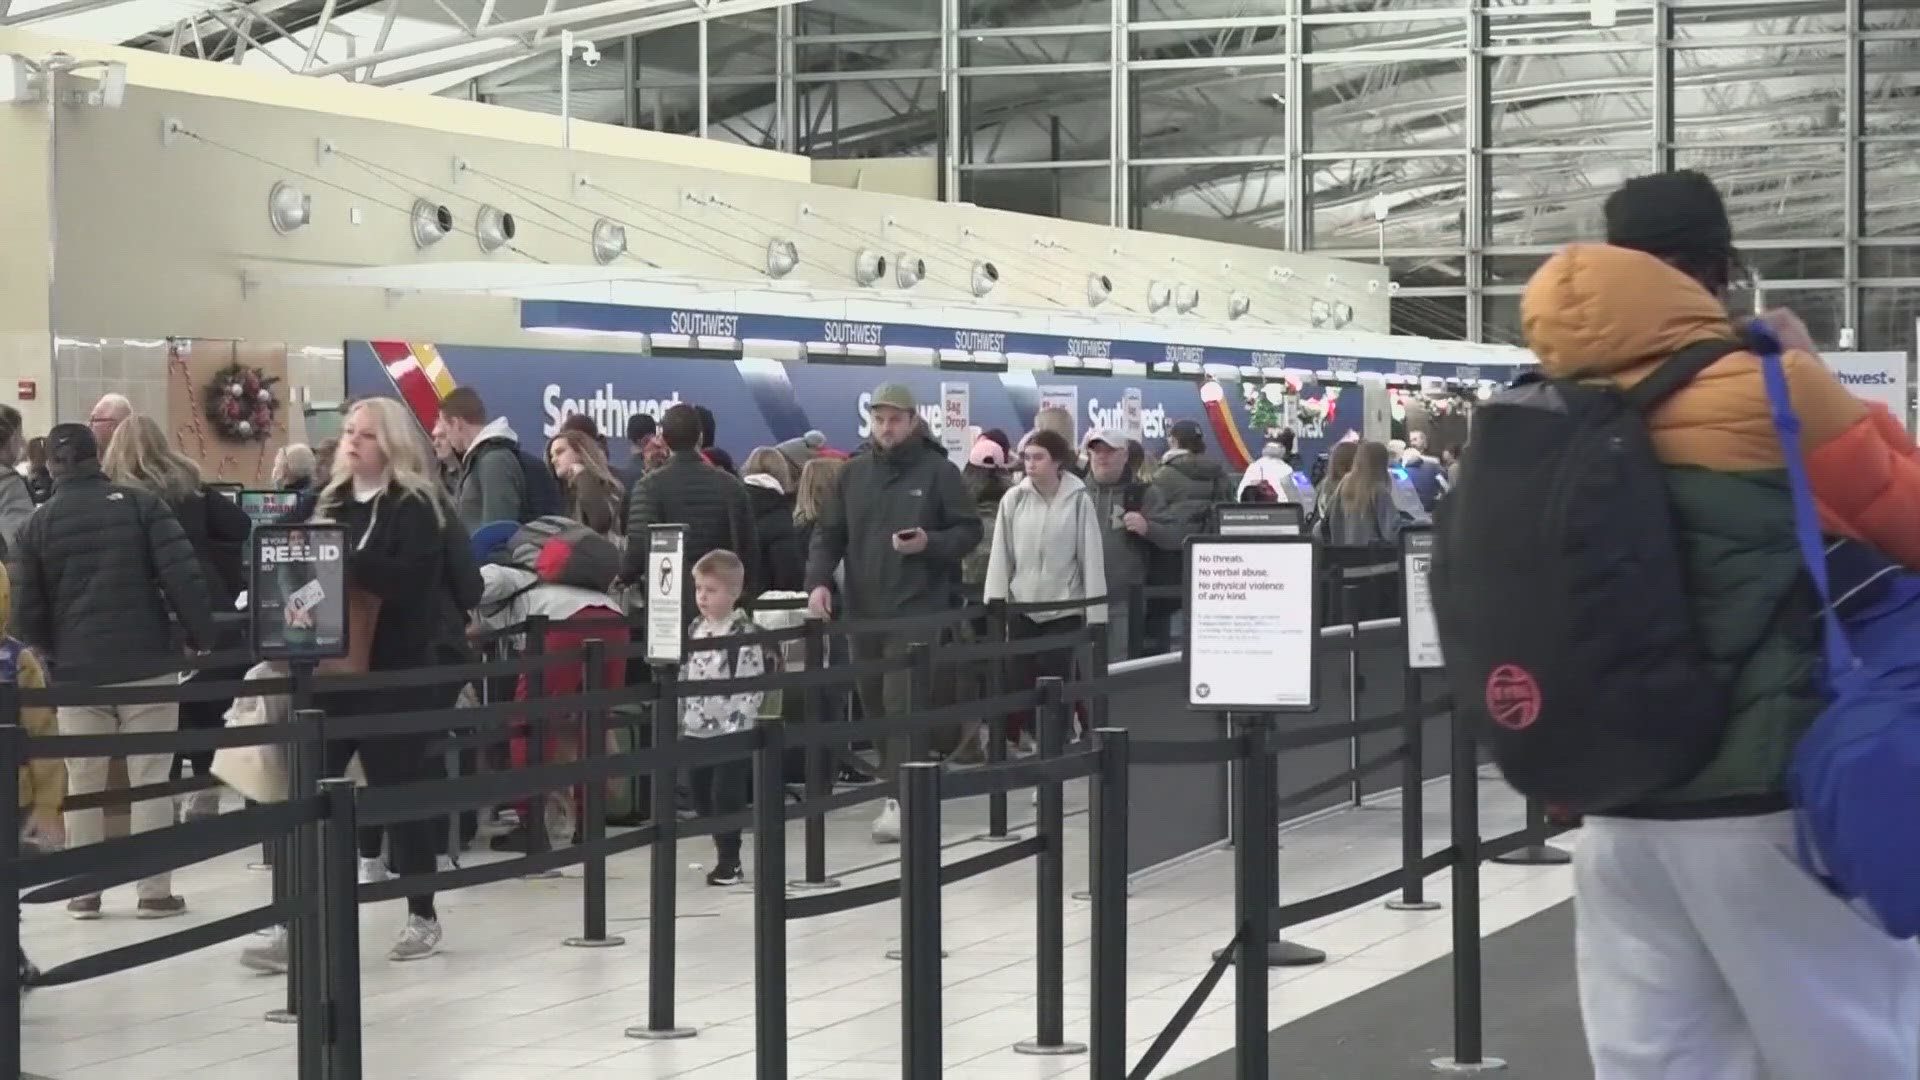 As part of the deal, Southwest has to pay passengers whose flights are delayed in the future.